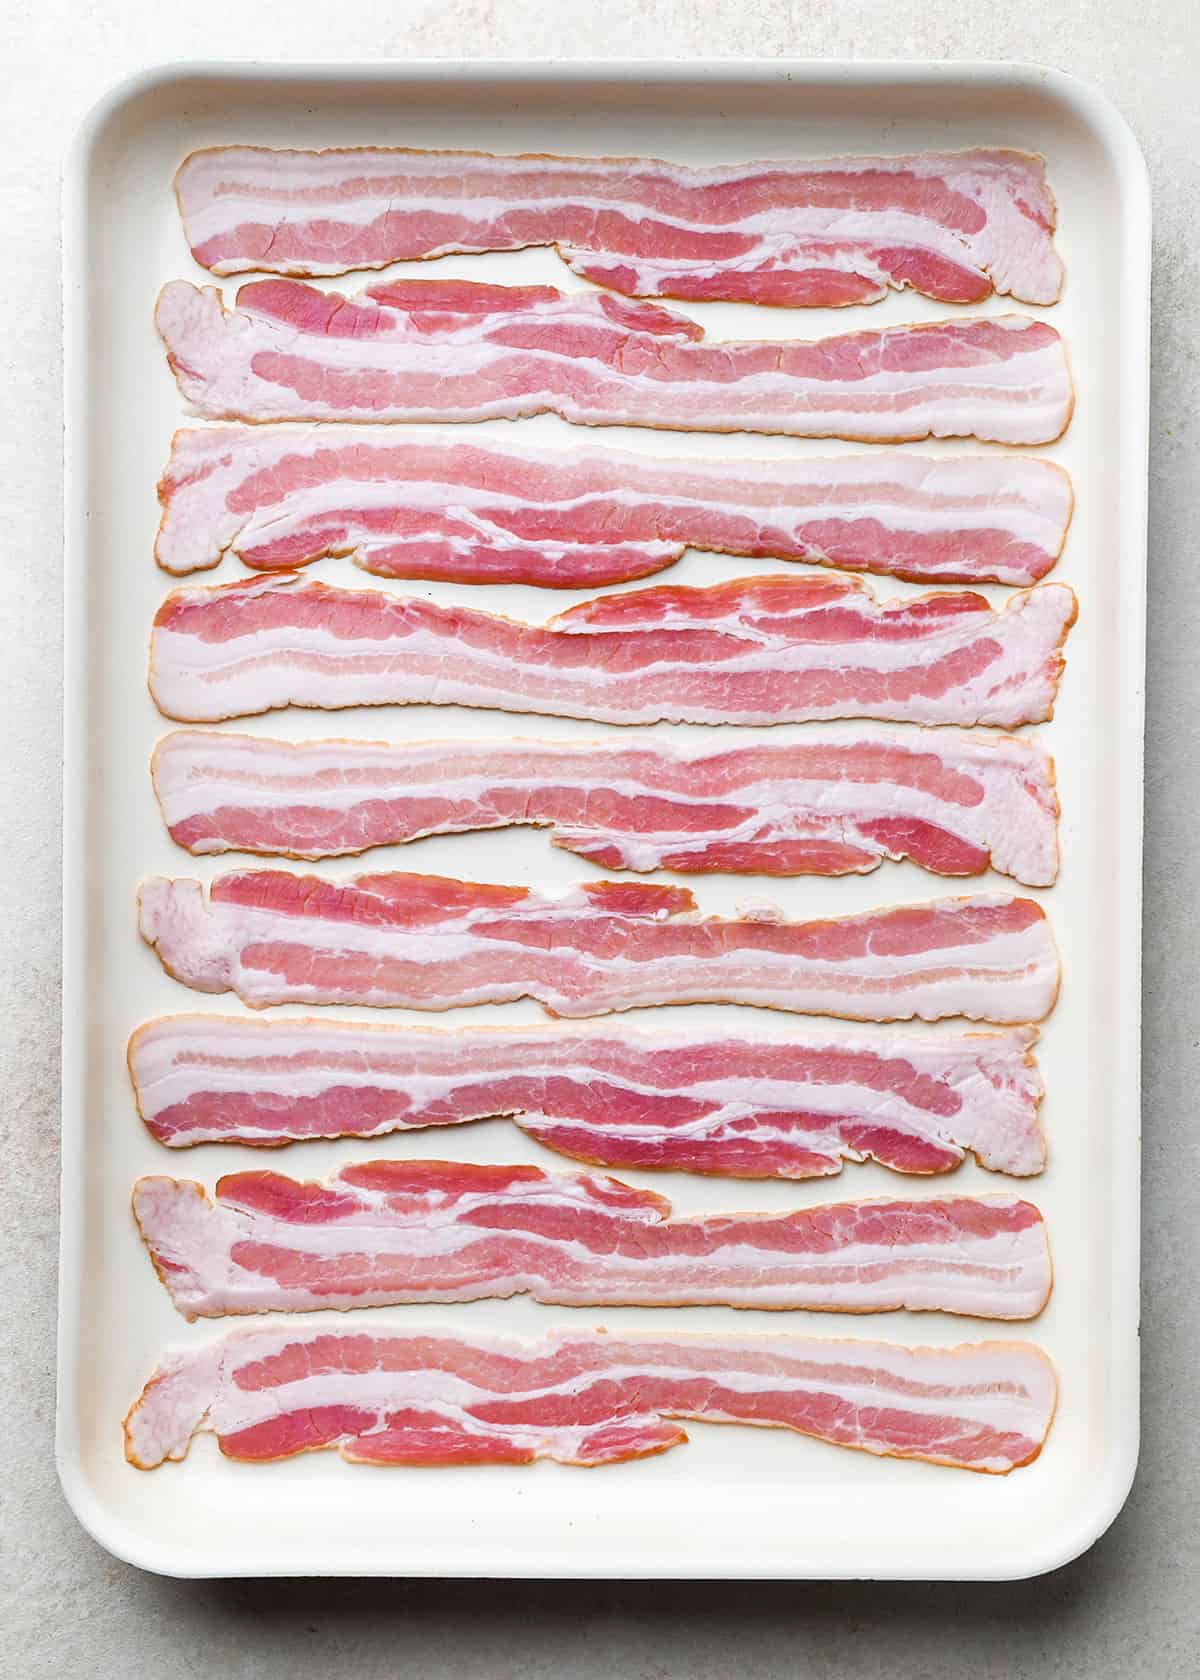 How to Cook Bacon in the Oven - 9 raw pieces of bacon on a baking sheet